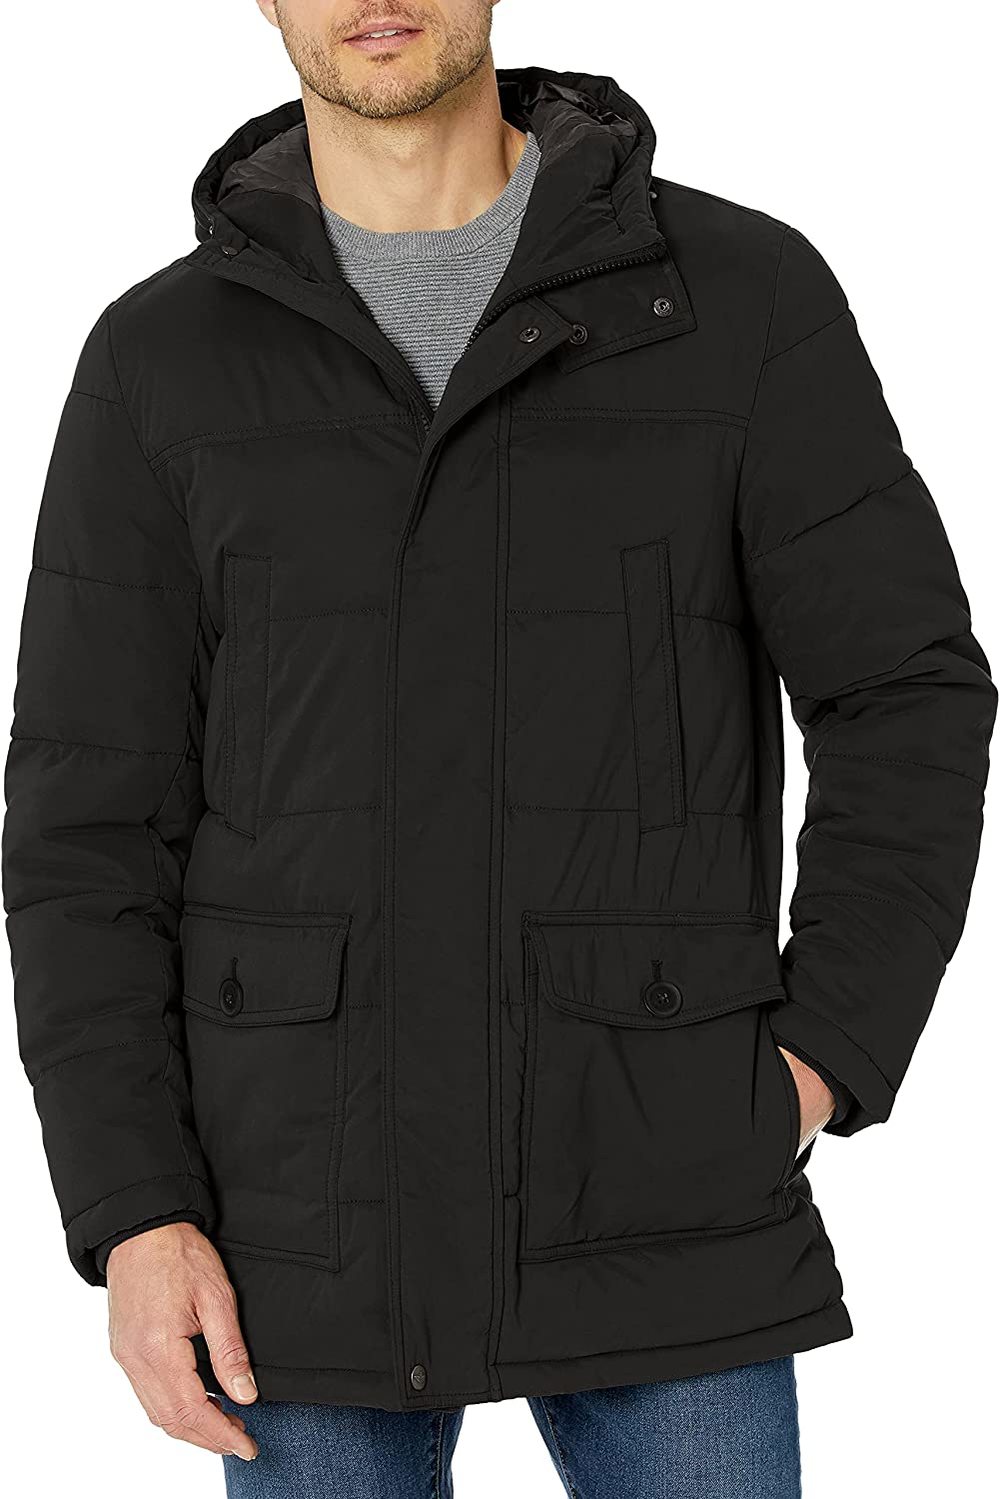 Dockers Men's Microtwill Long Hooded Parka